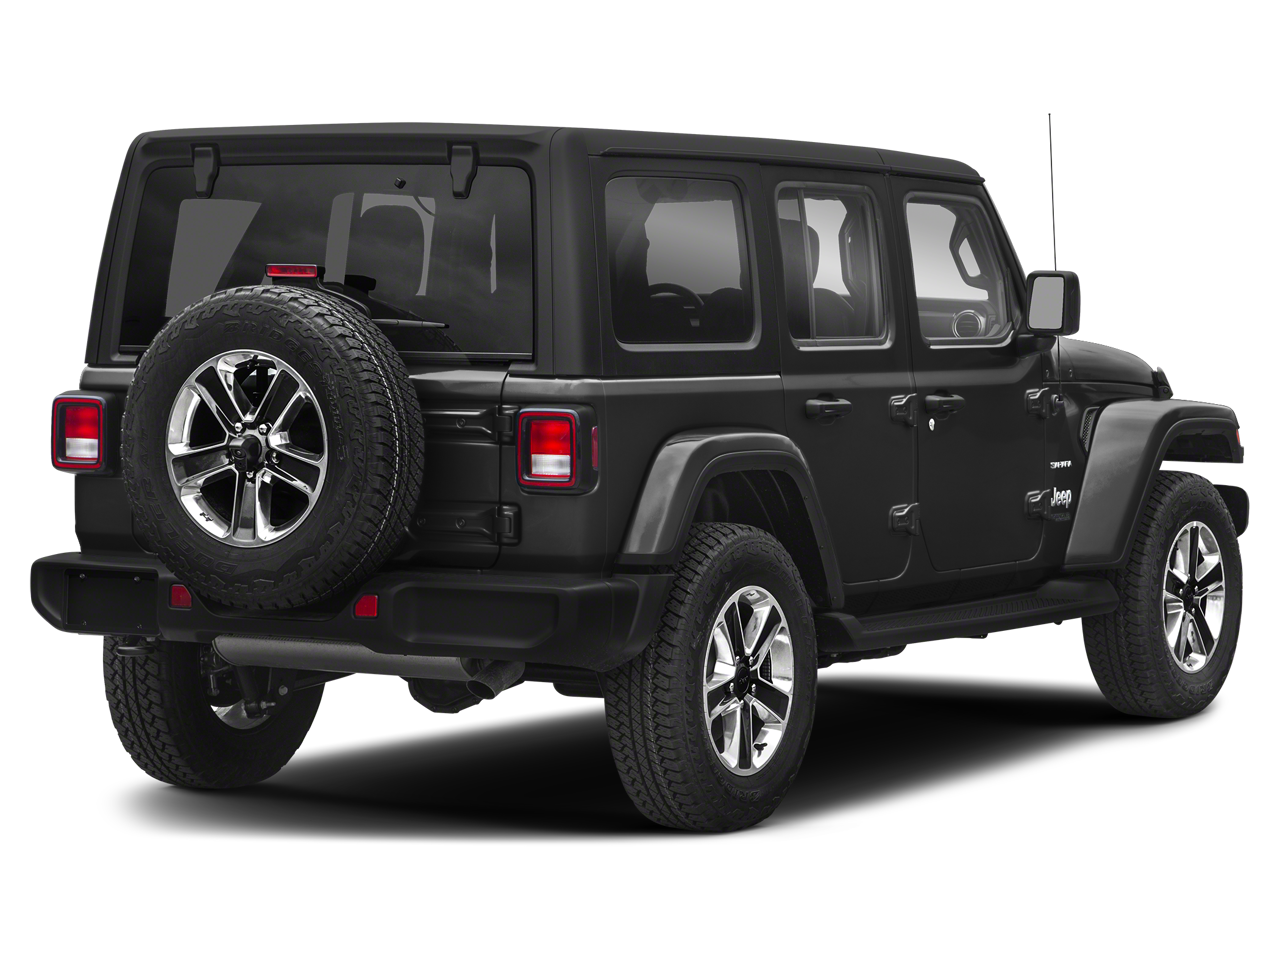 2020 Jeep Wrangler Unlimited High Altitude 4X4